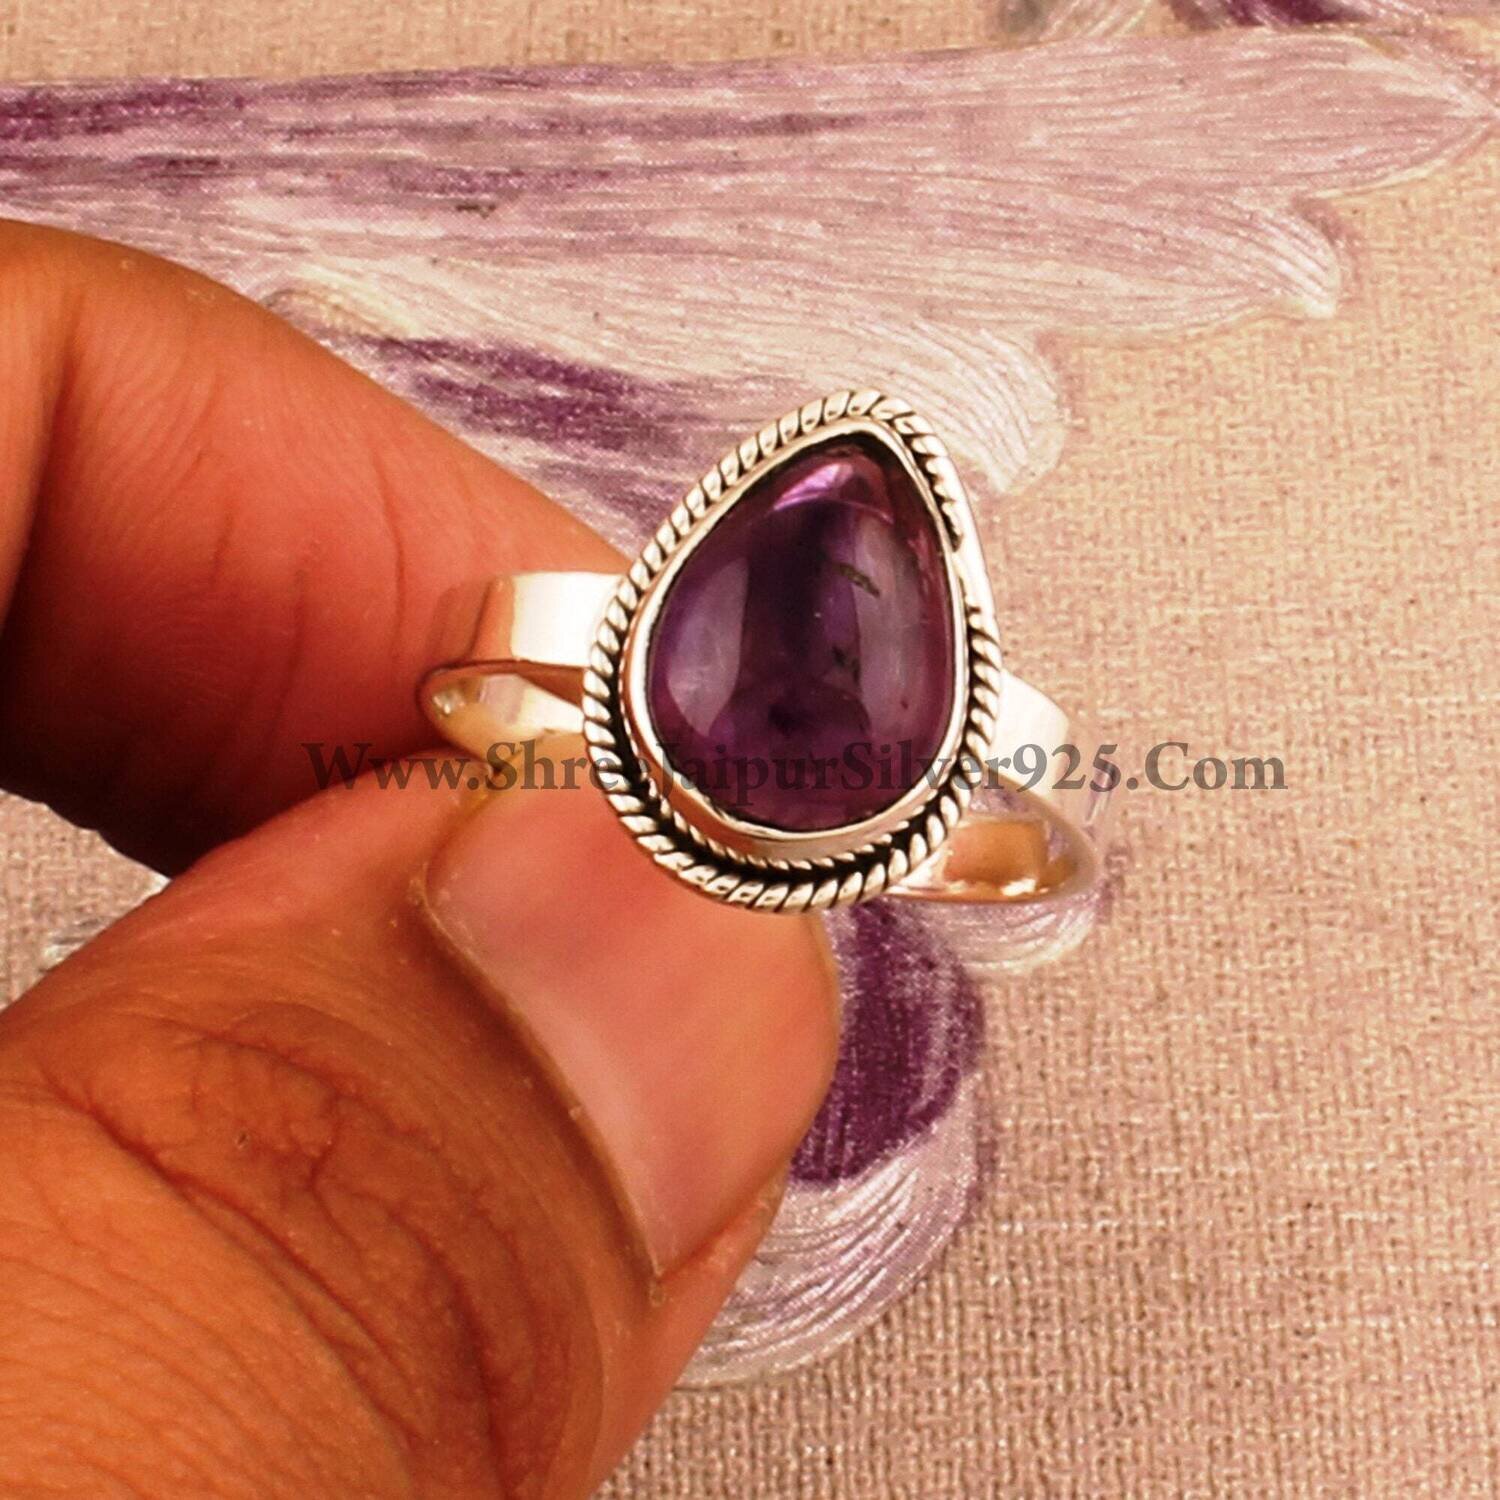 Natural Amethyst Solid 925 Sterling Silver Pear Gemstone Ring For Women, Boho Handmade Stone Silver Ring For Wedding Anniversary Gift idea